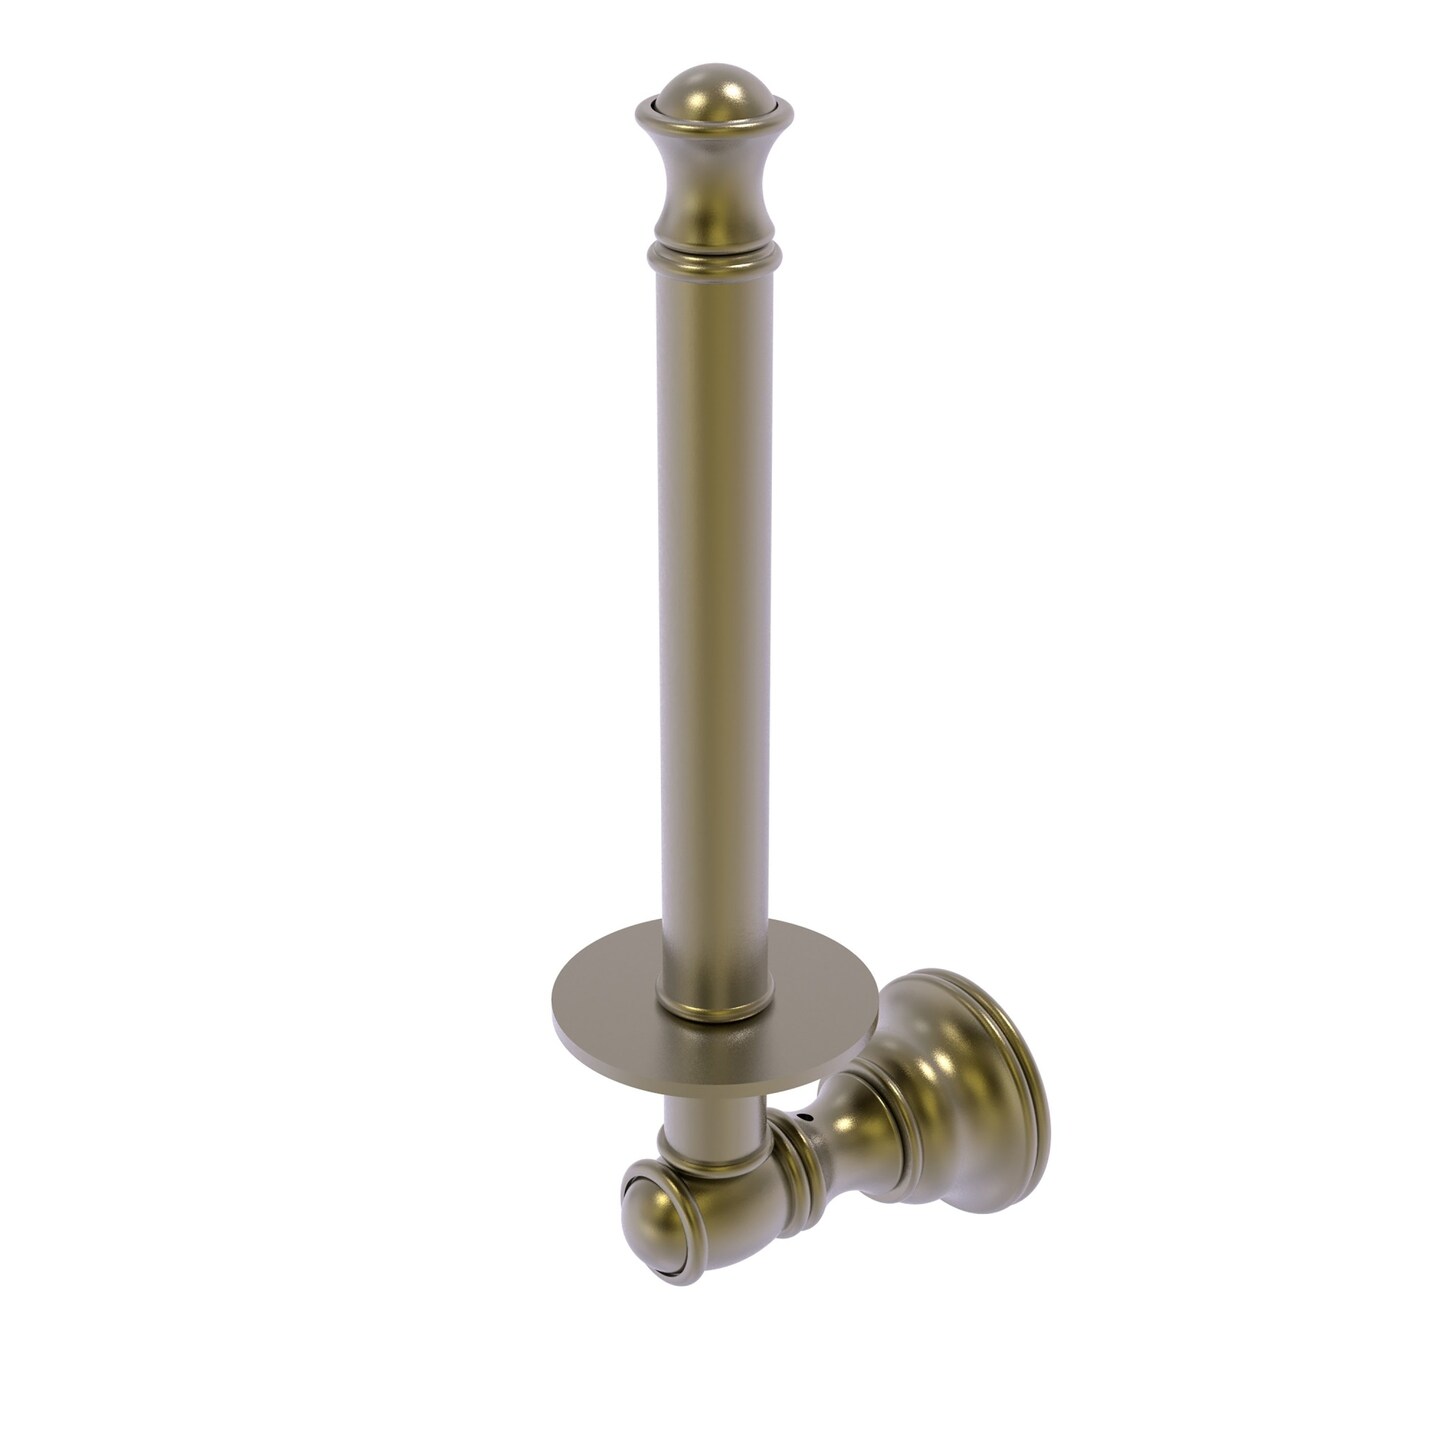 Carolina Collection Upright Toilet Paper Holder in Antique Brass